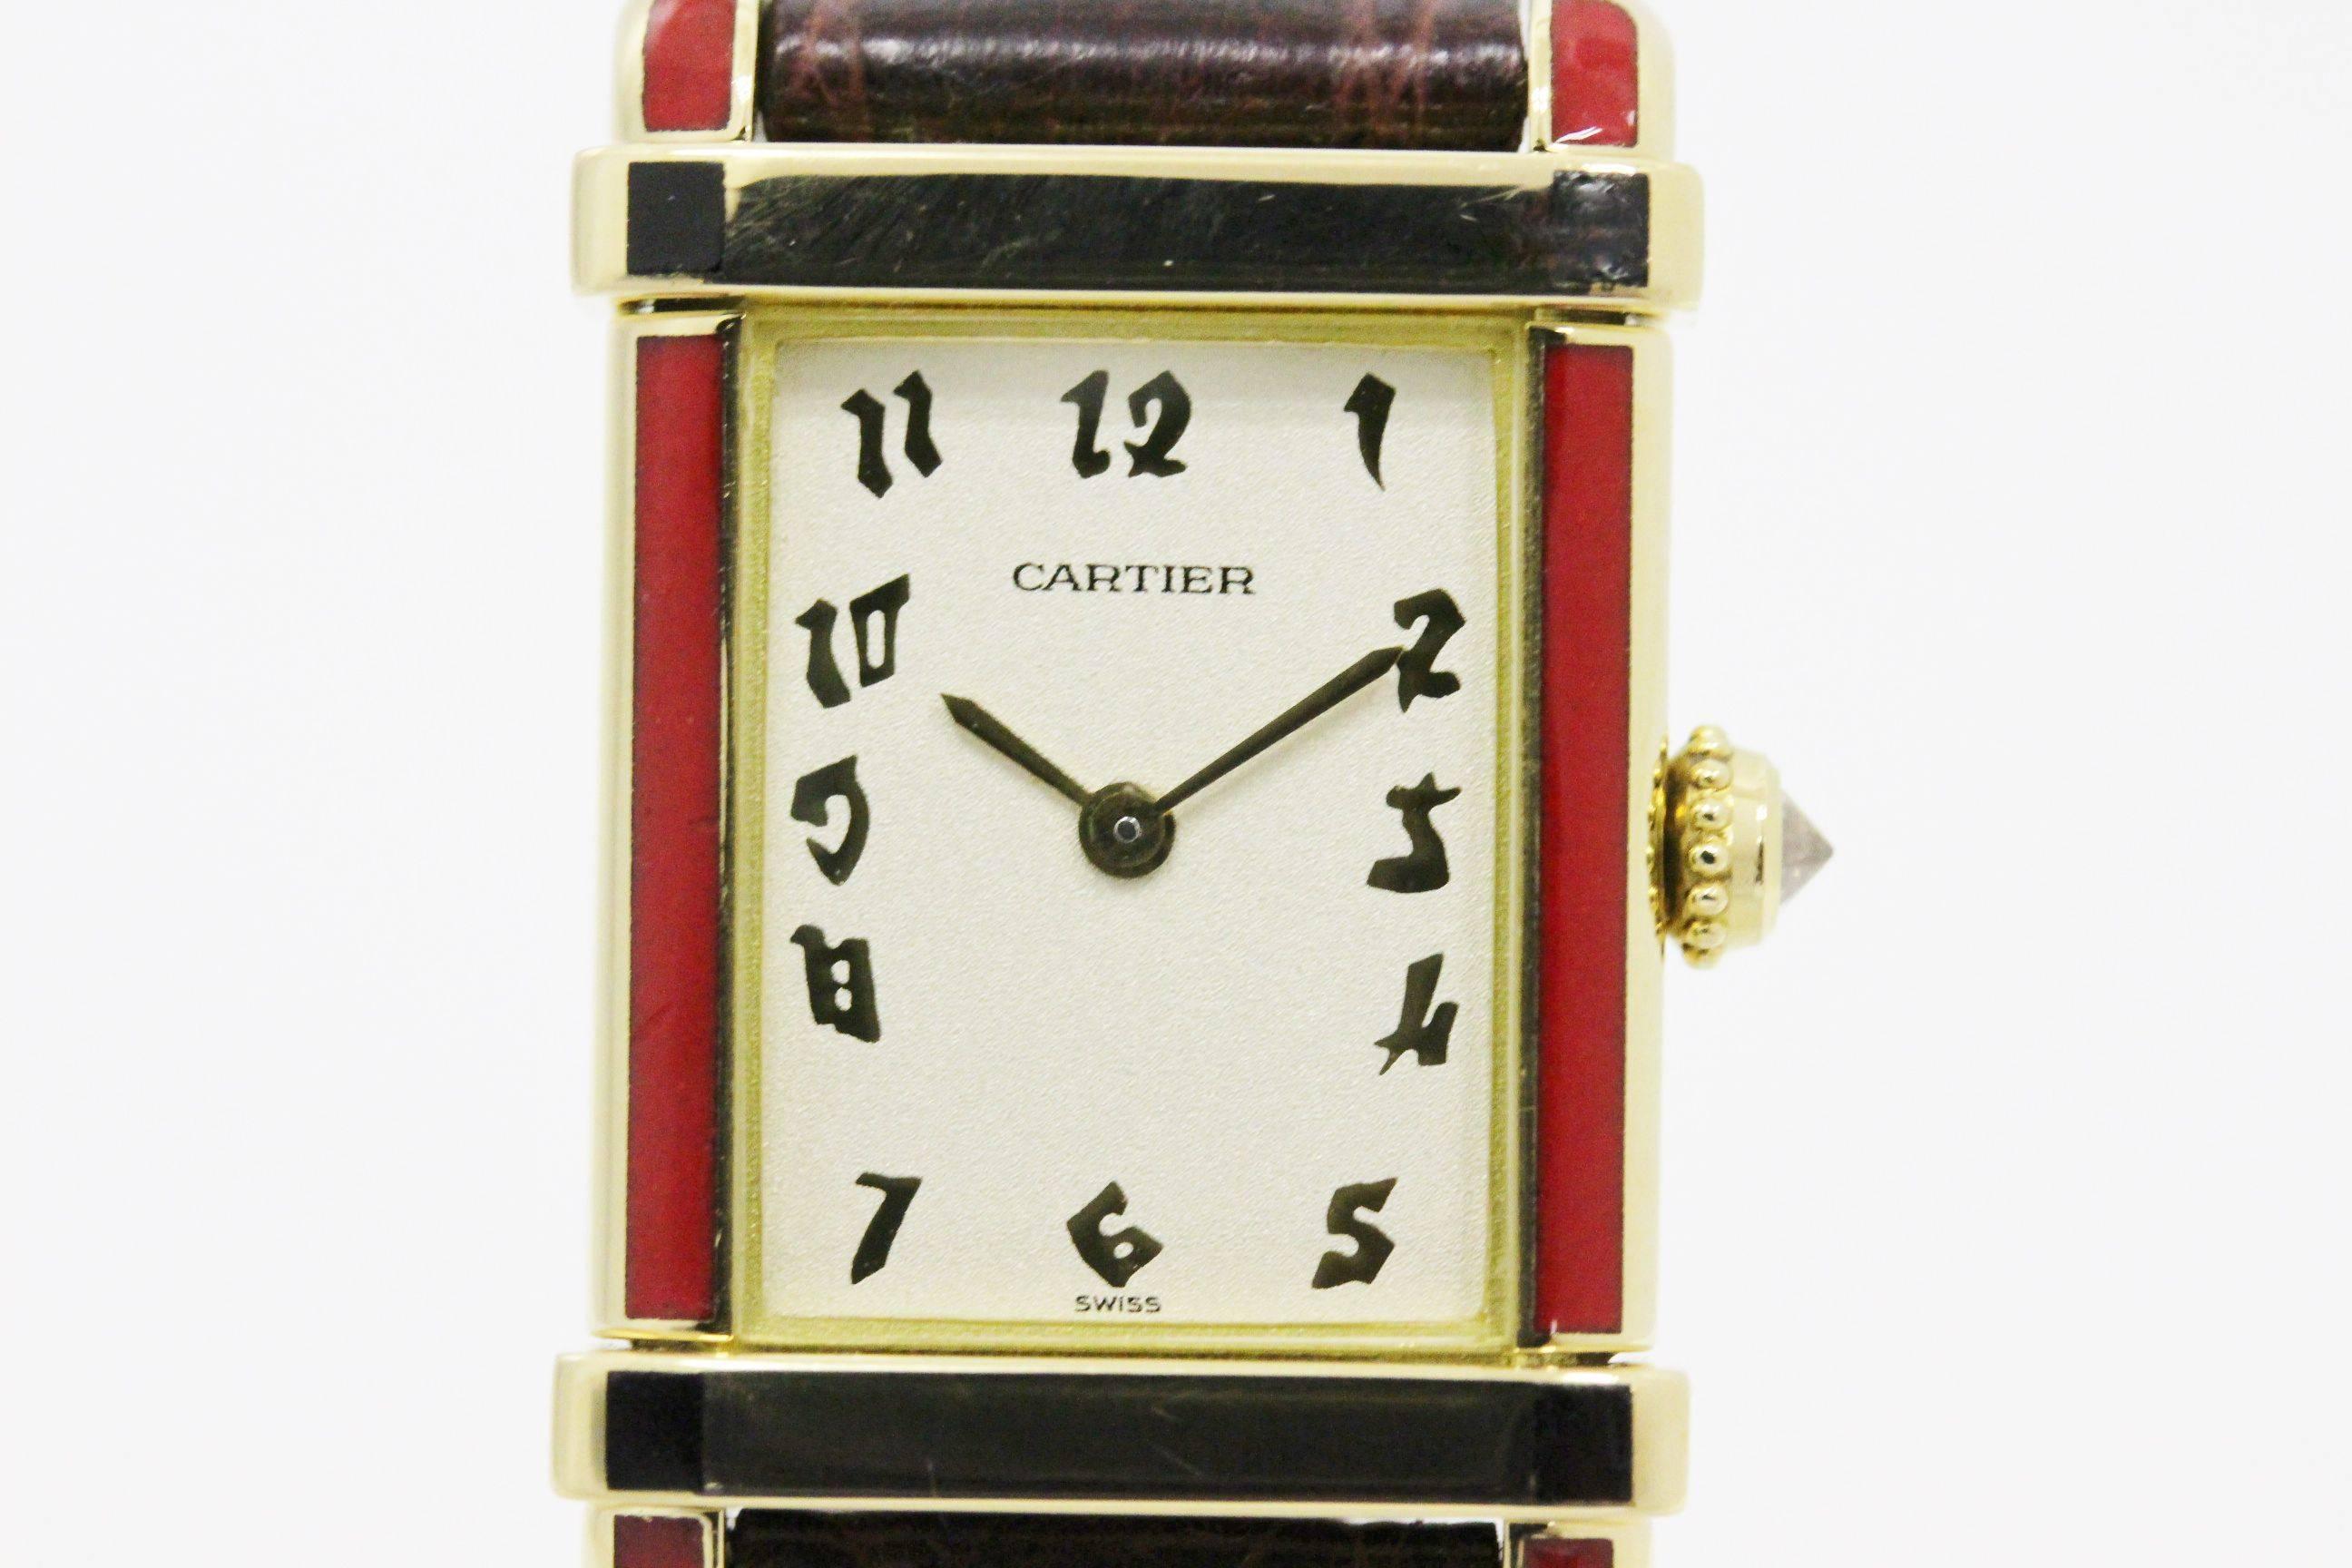 CURATOR'S NOTES

WOW!  LIMITED TIME PRICE REDUCTION!

Sure, a lot of people have the Cartier Tank, but what about the Cartier Tank Chinoise?  We think not.  Stunning and rare Cartier 18kt gold Tank Chinoise timepiece.

18kt yellow